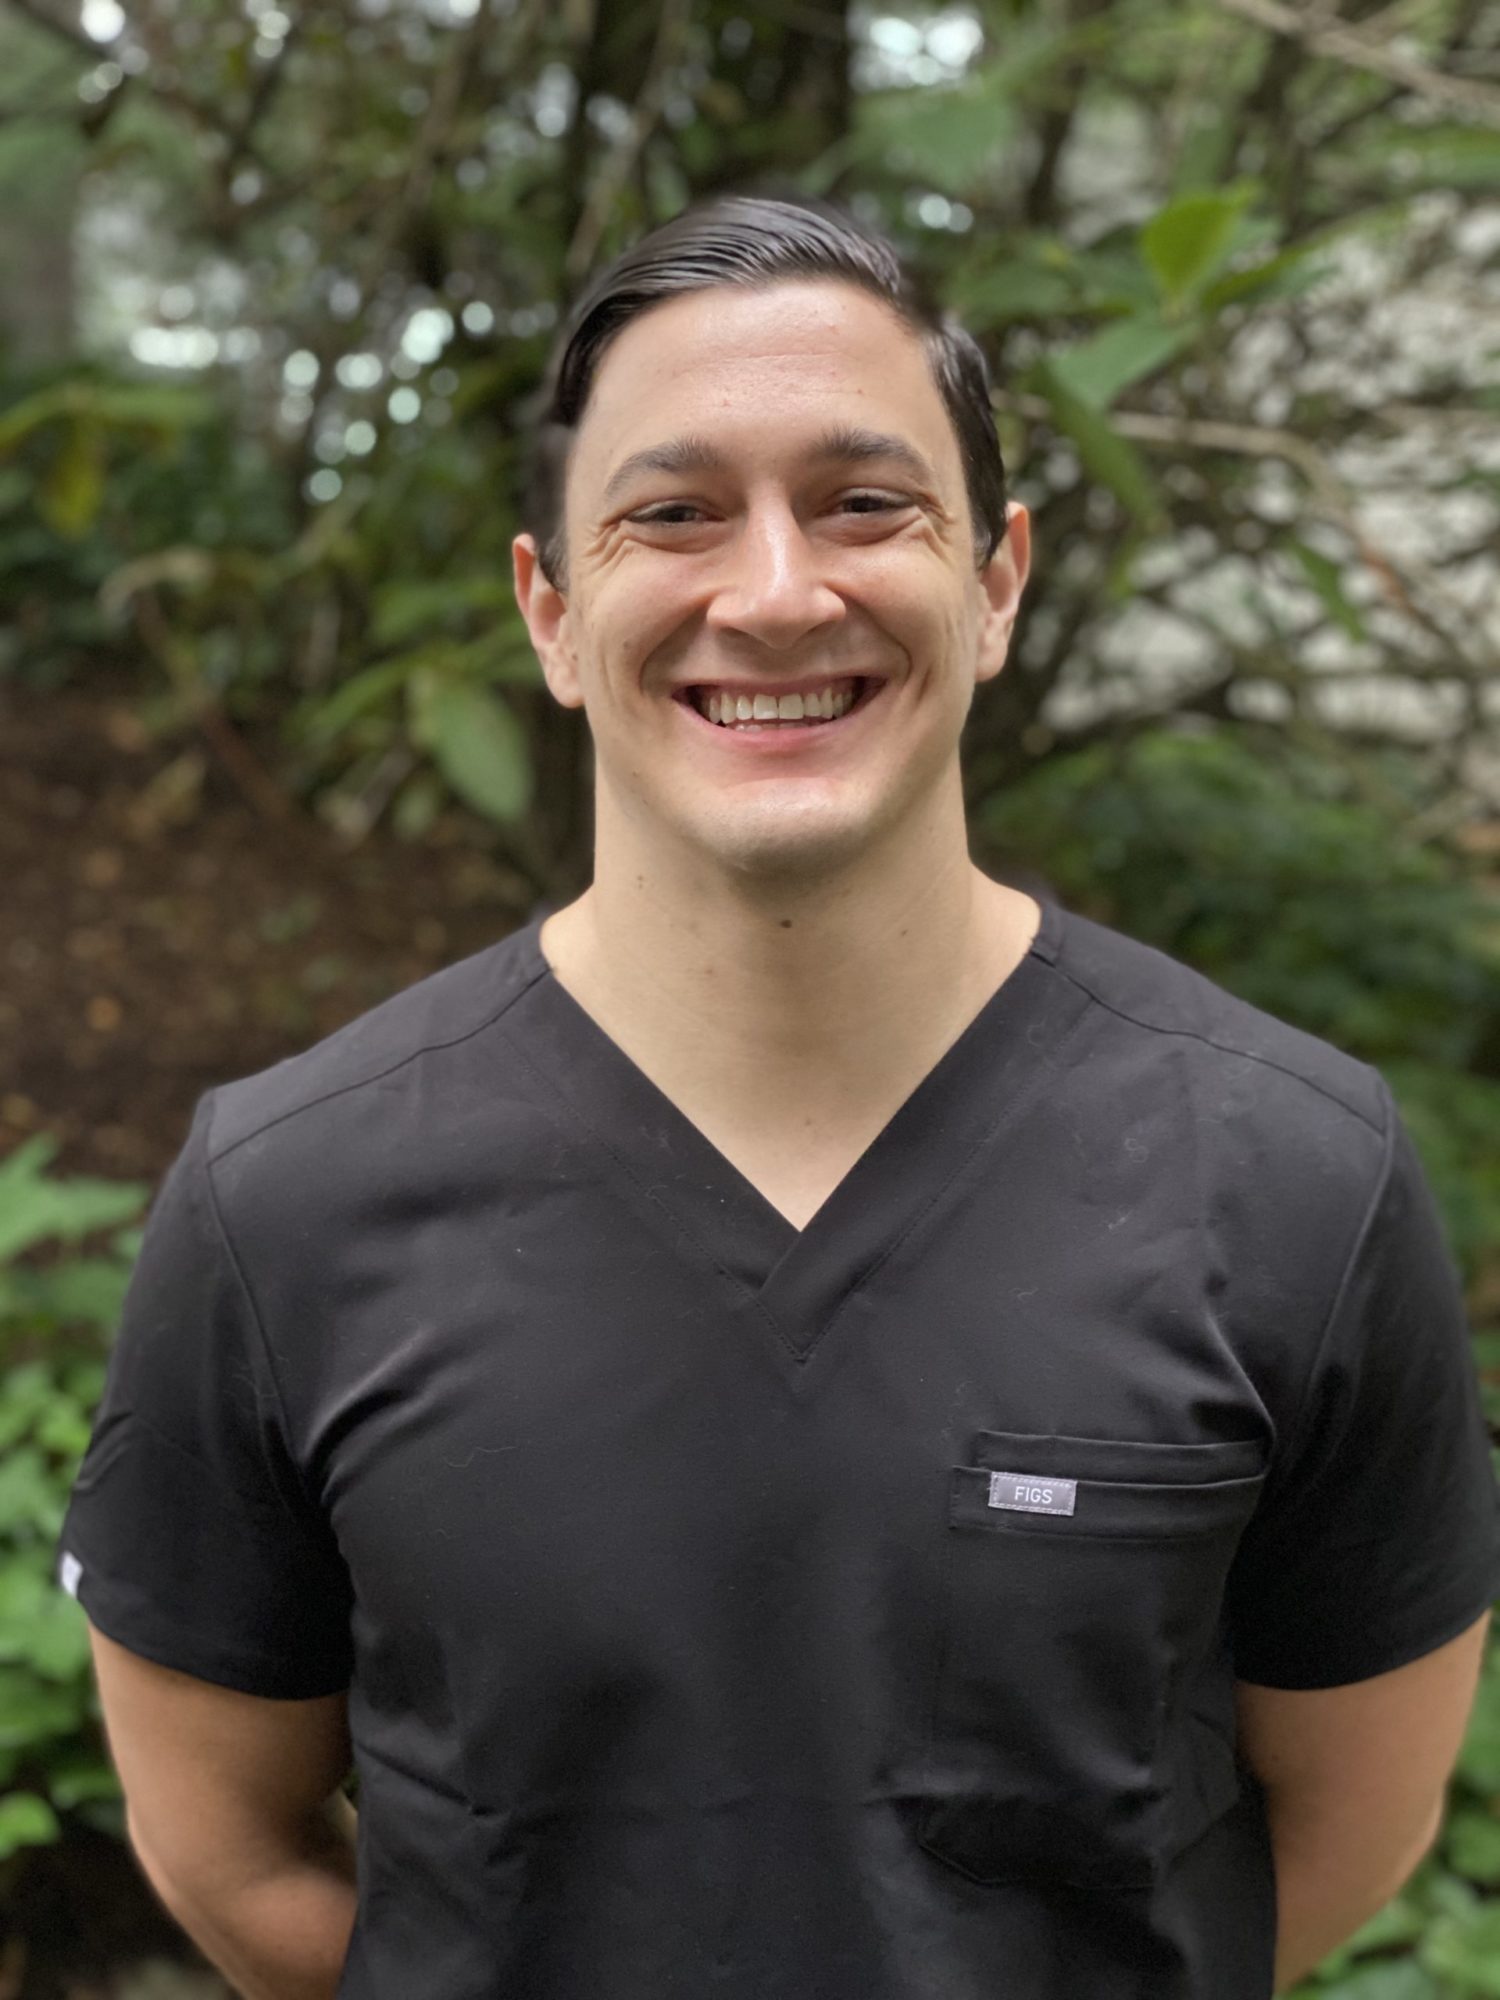 Orthodontist Dr. Cameron Freelove from Dudley Orthodontics smiling in a black shirt.